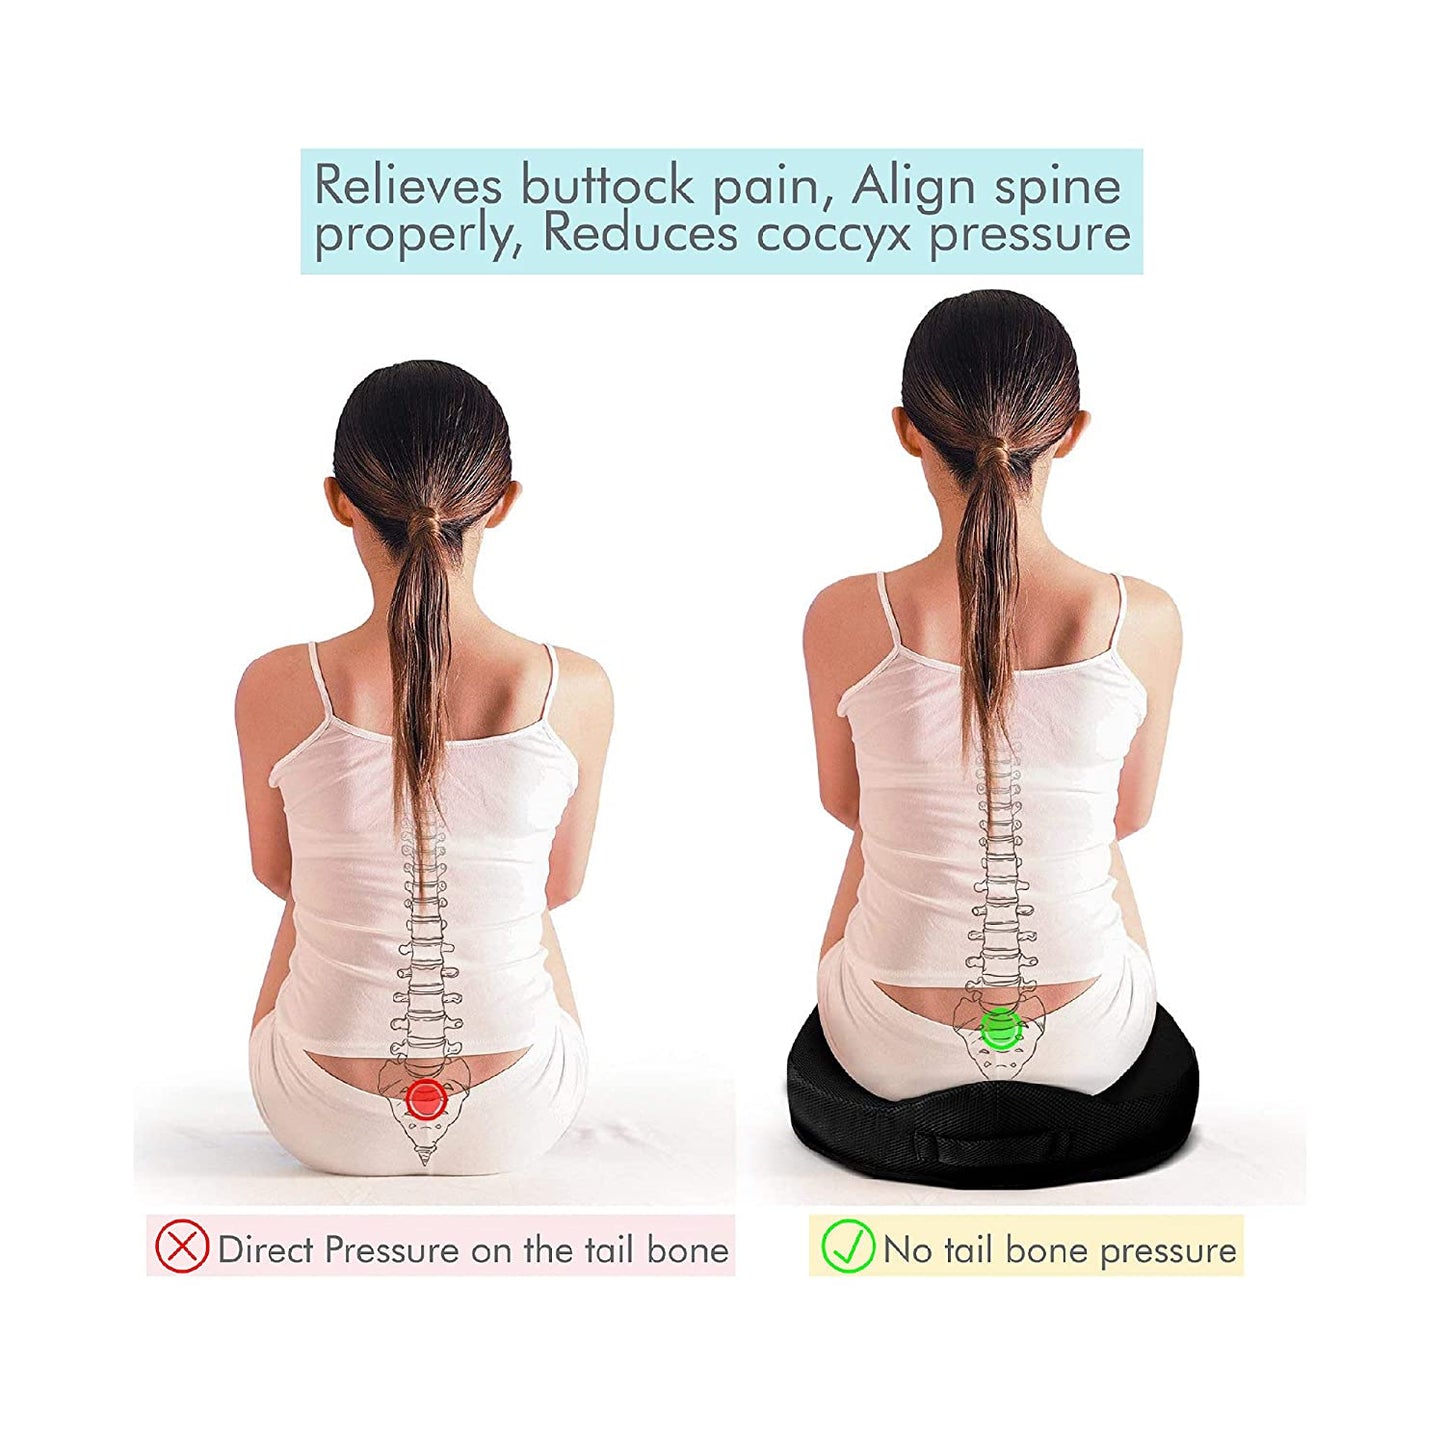 Wellness Cushion for Back Pain Support